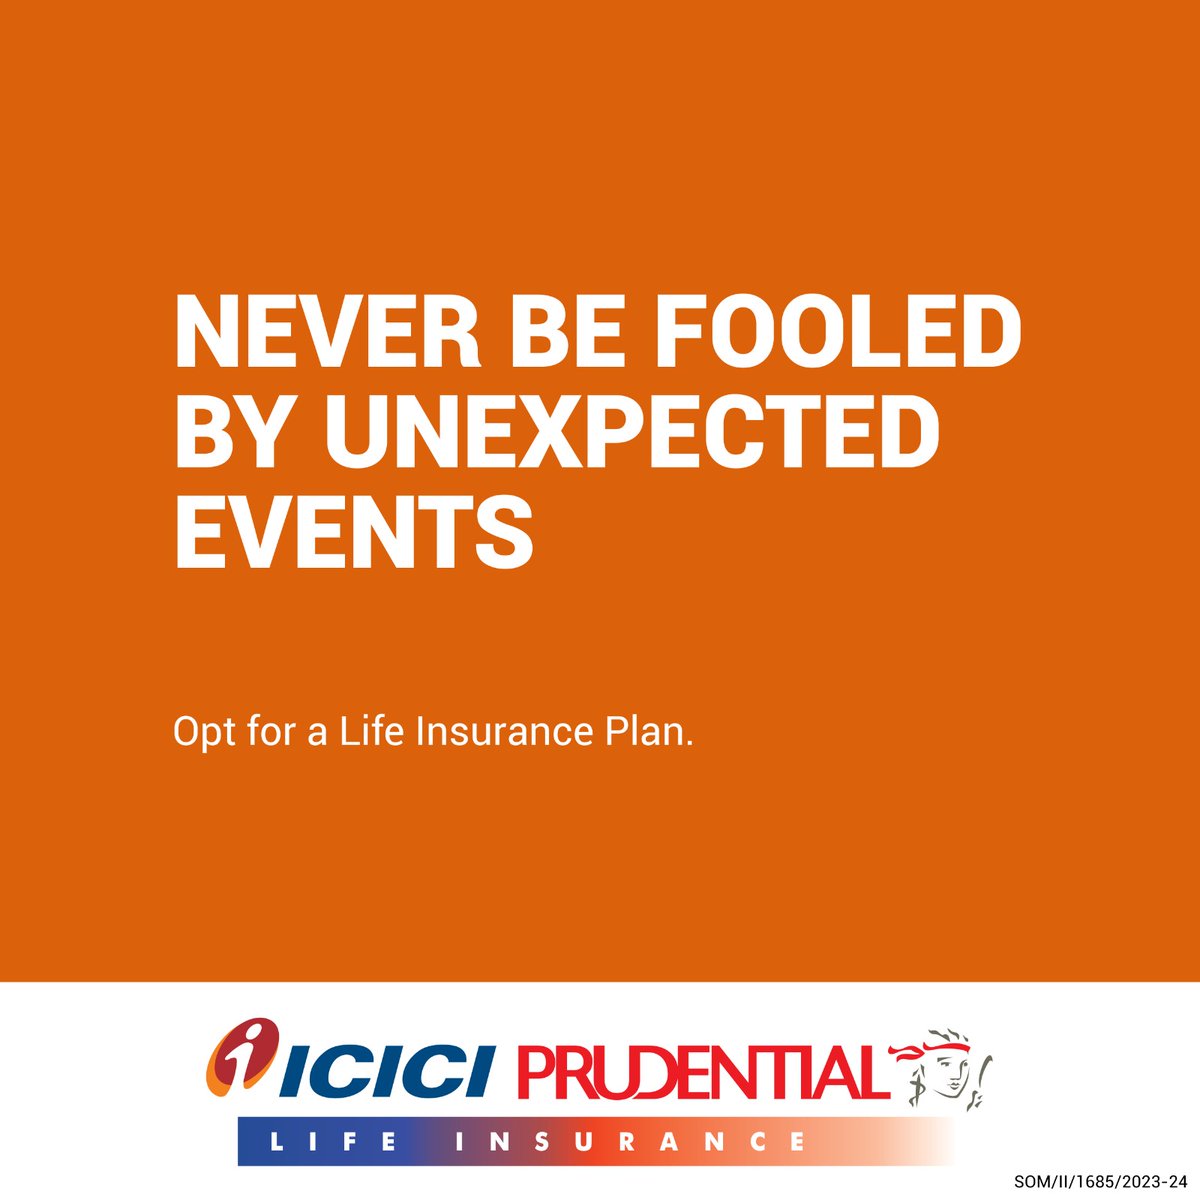 This April Fool’s Day, ensure you are foolproof with a life insurance plan. Visit: shorturl.at/qrsA5 Disclaimer: bit.ly/3tpPDcW